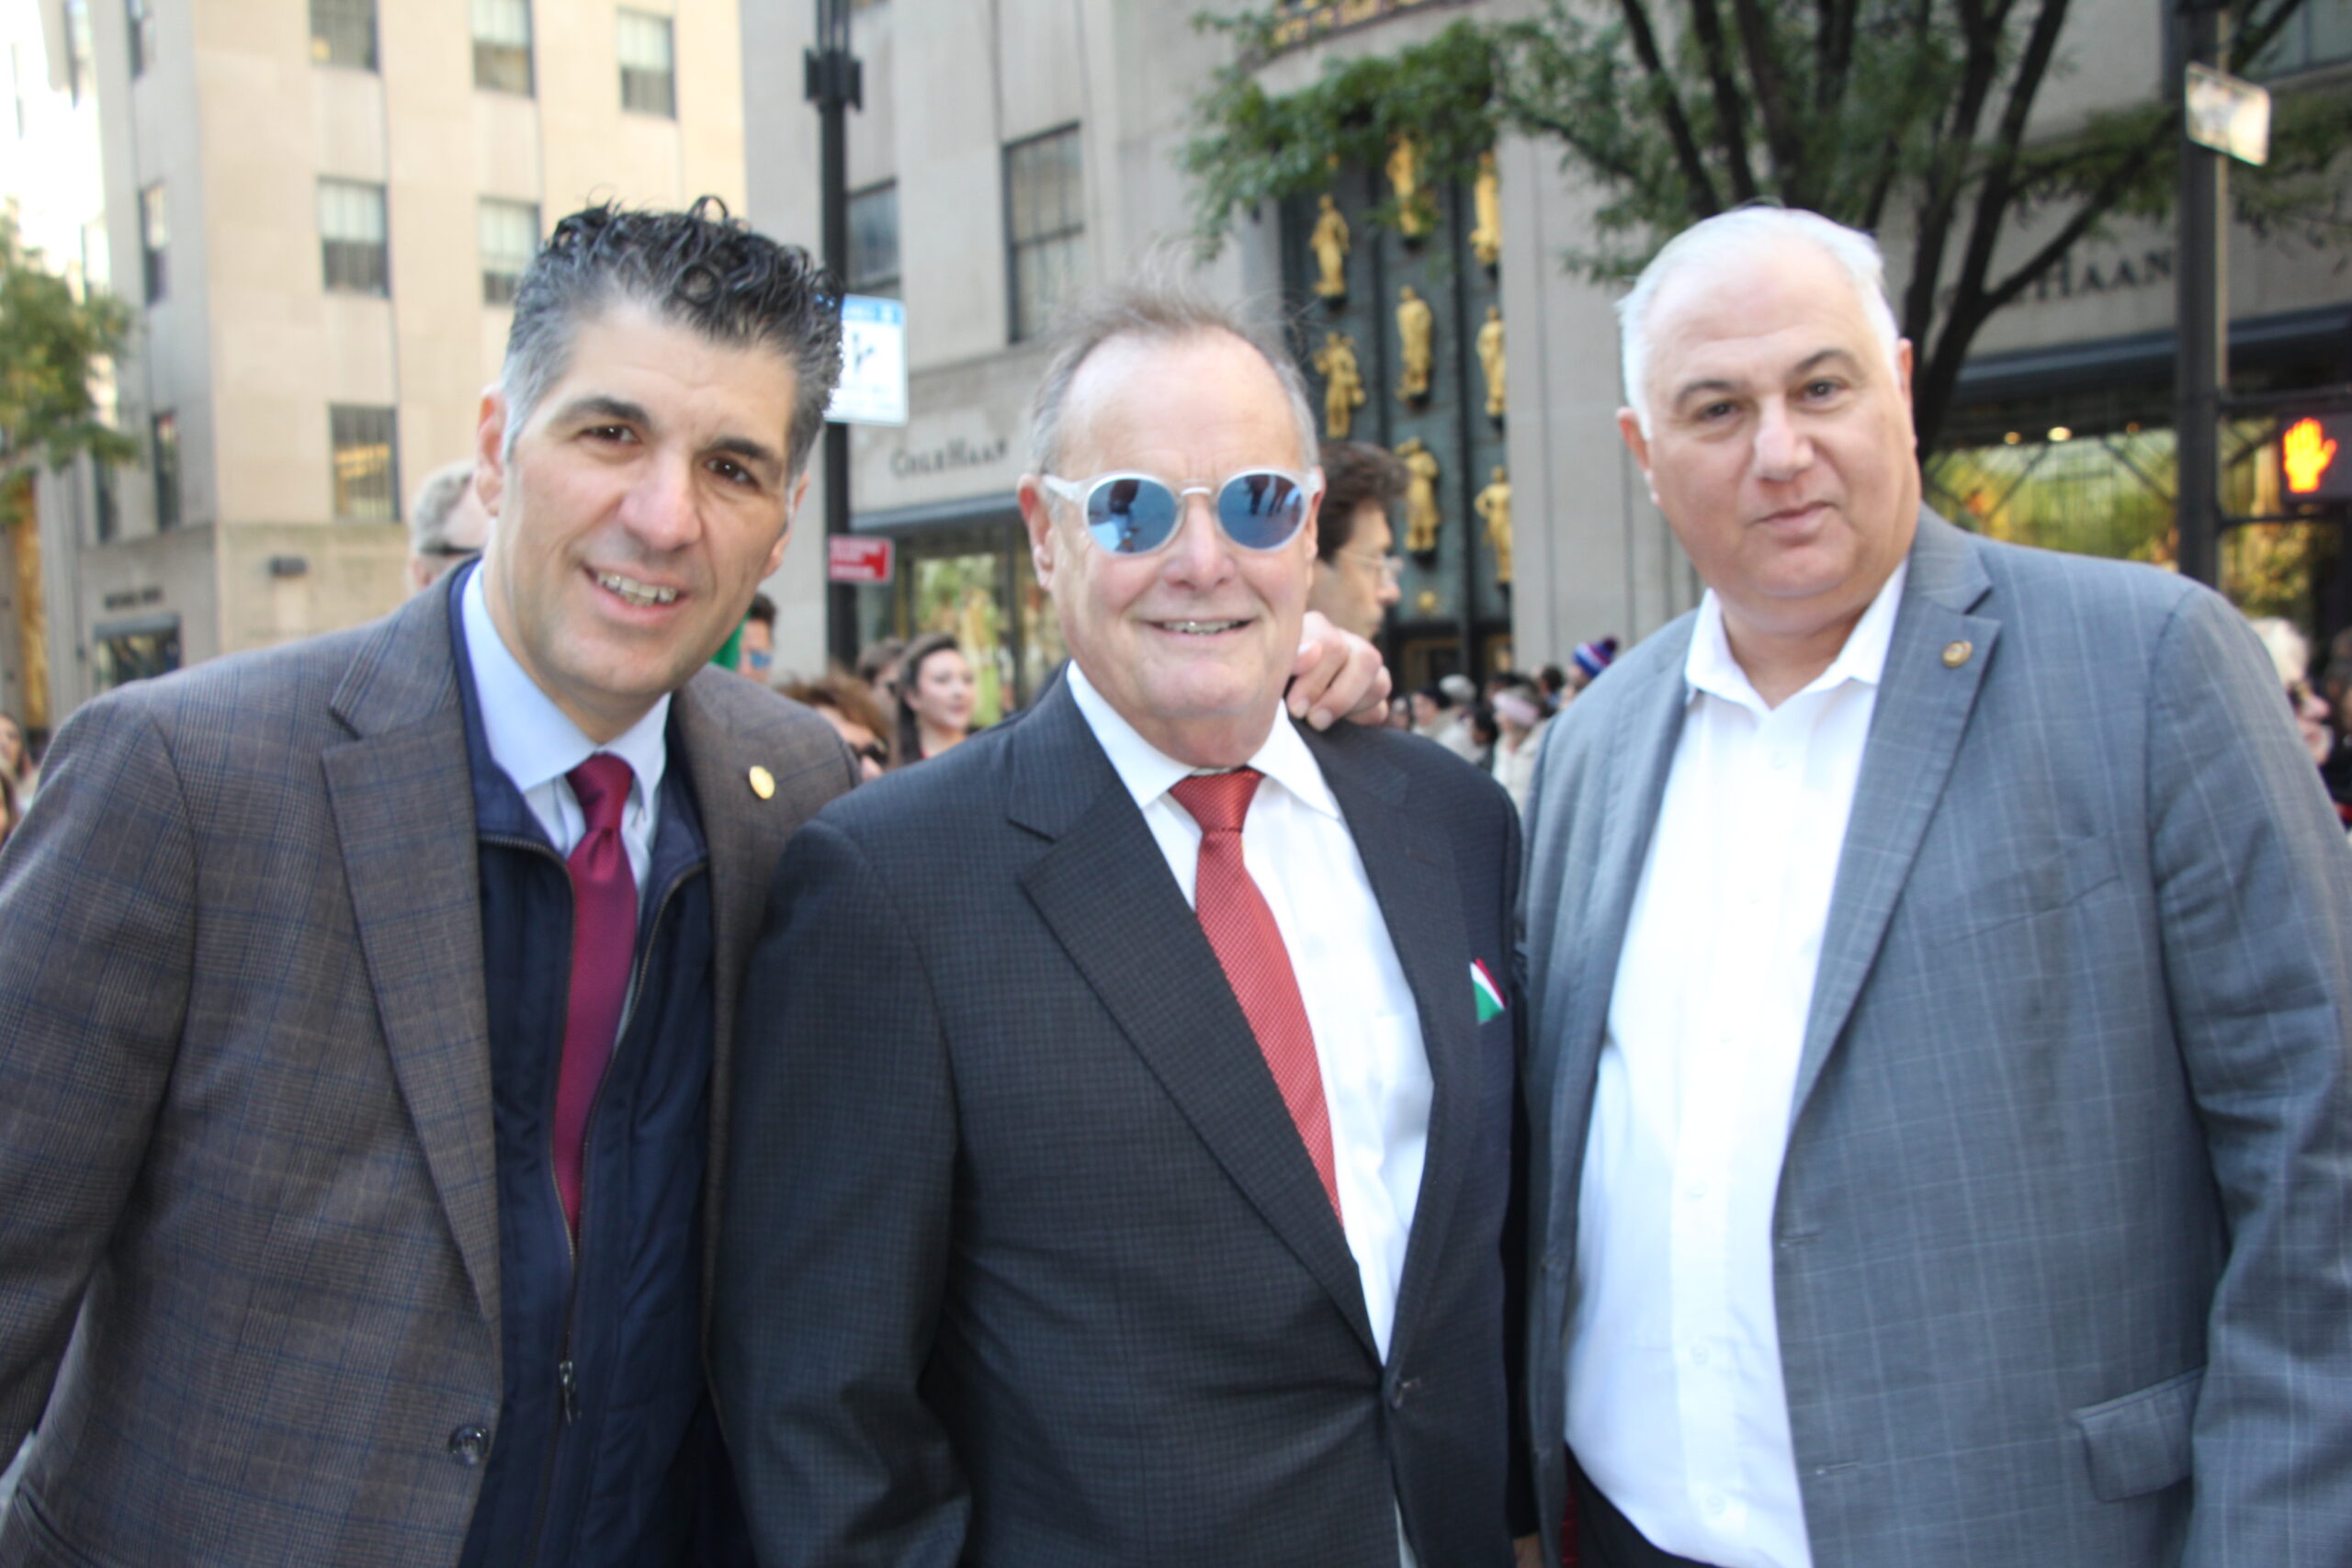 From left: Dominic Famulari, Gregory LaSpina and Dean Delianites are caught in a moment of camaraderie.